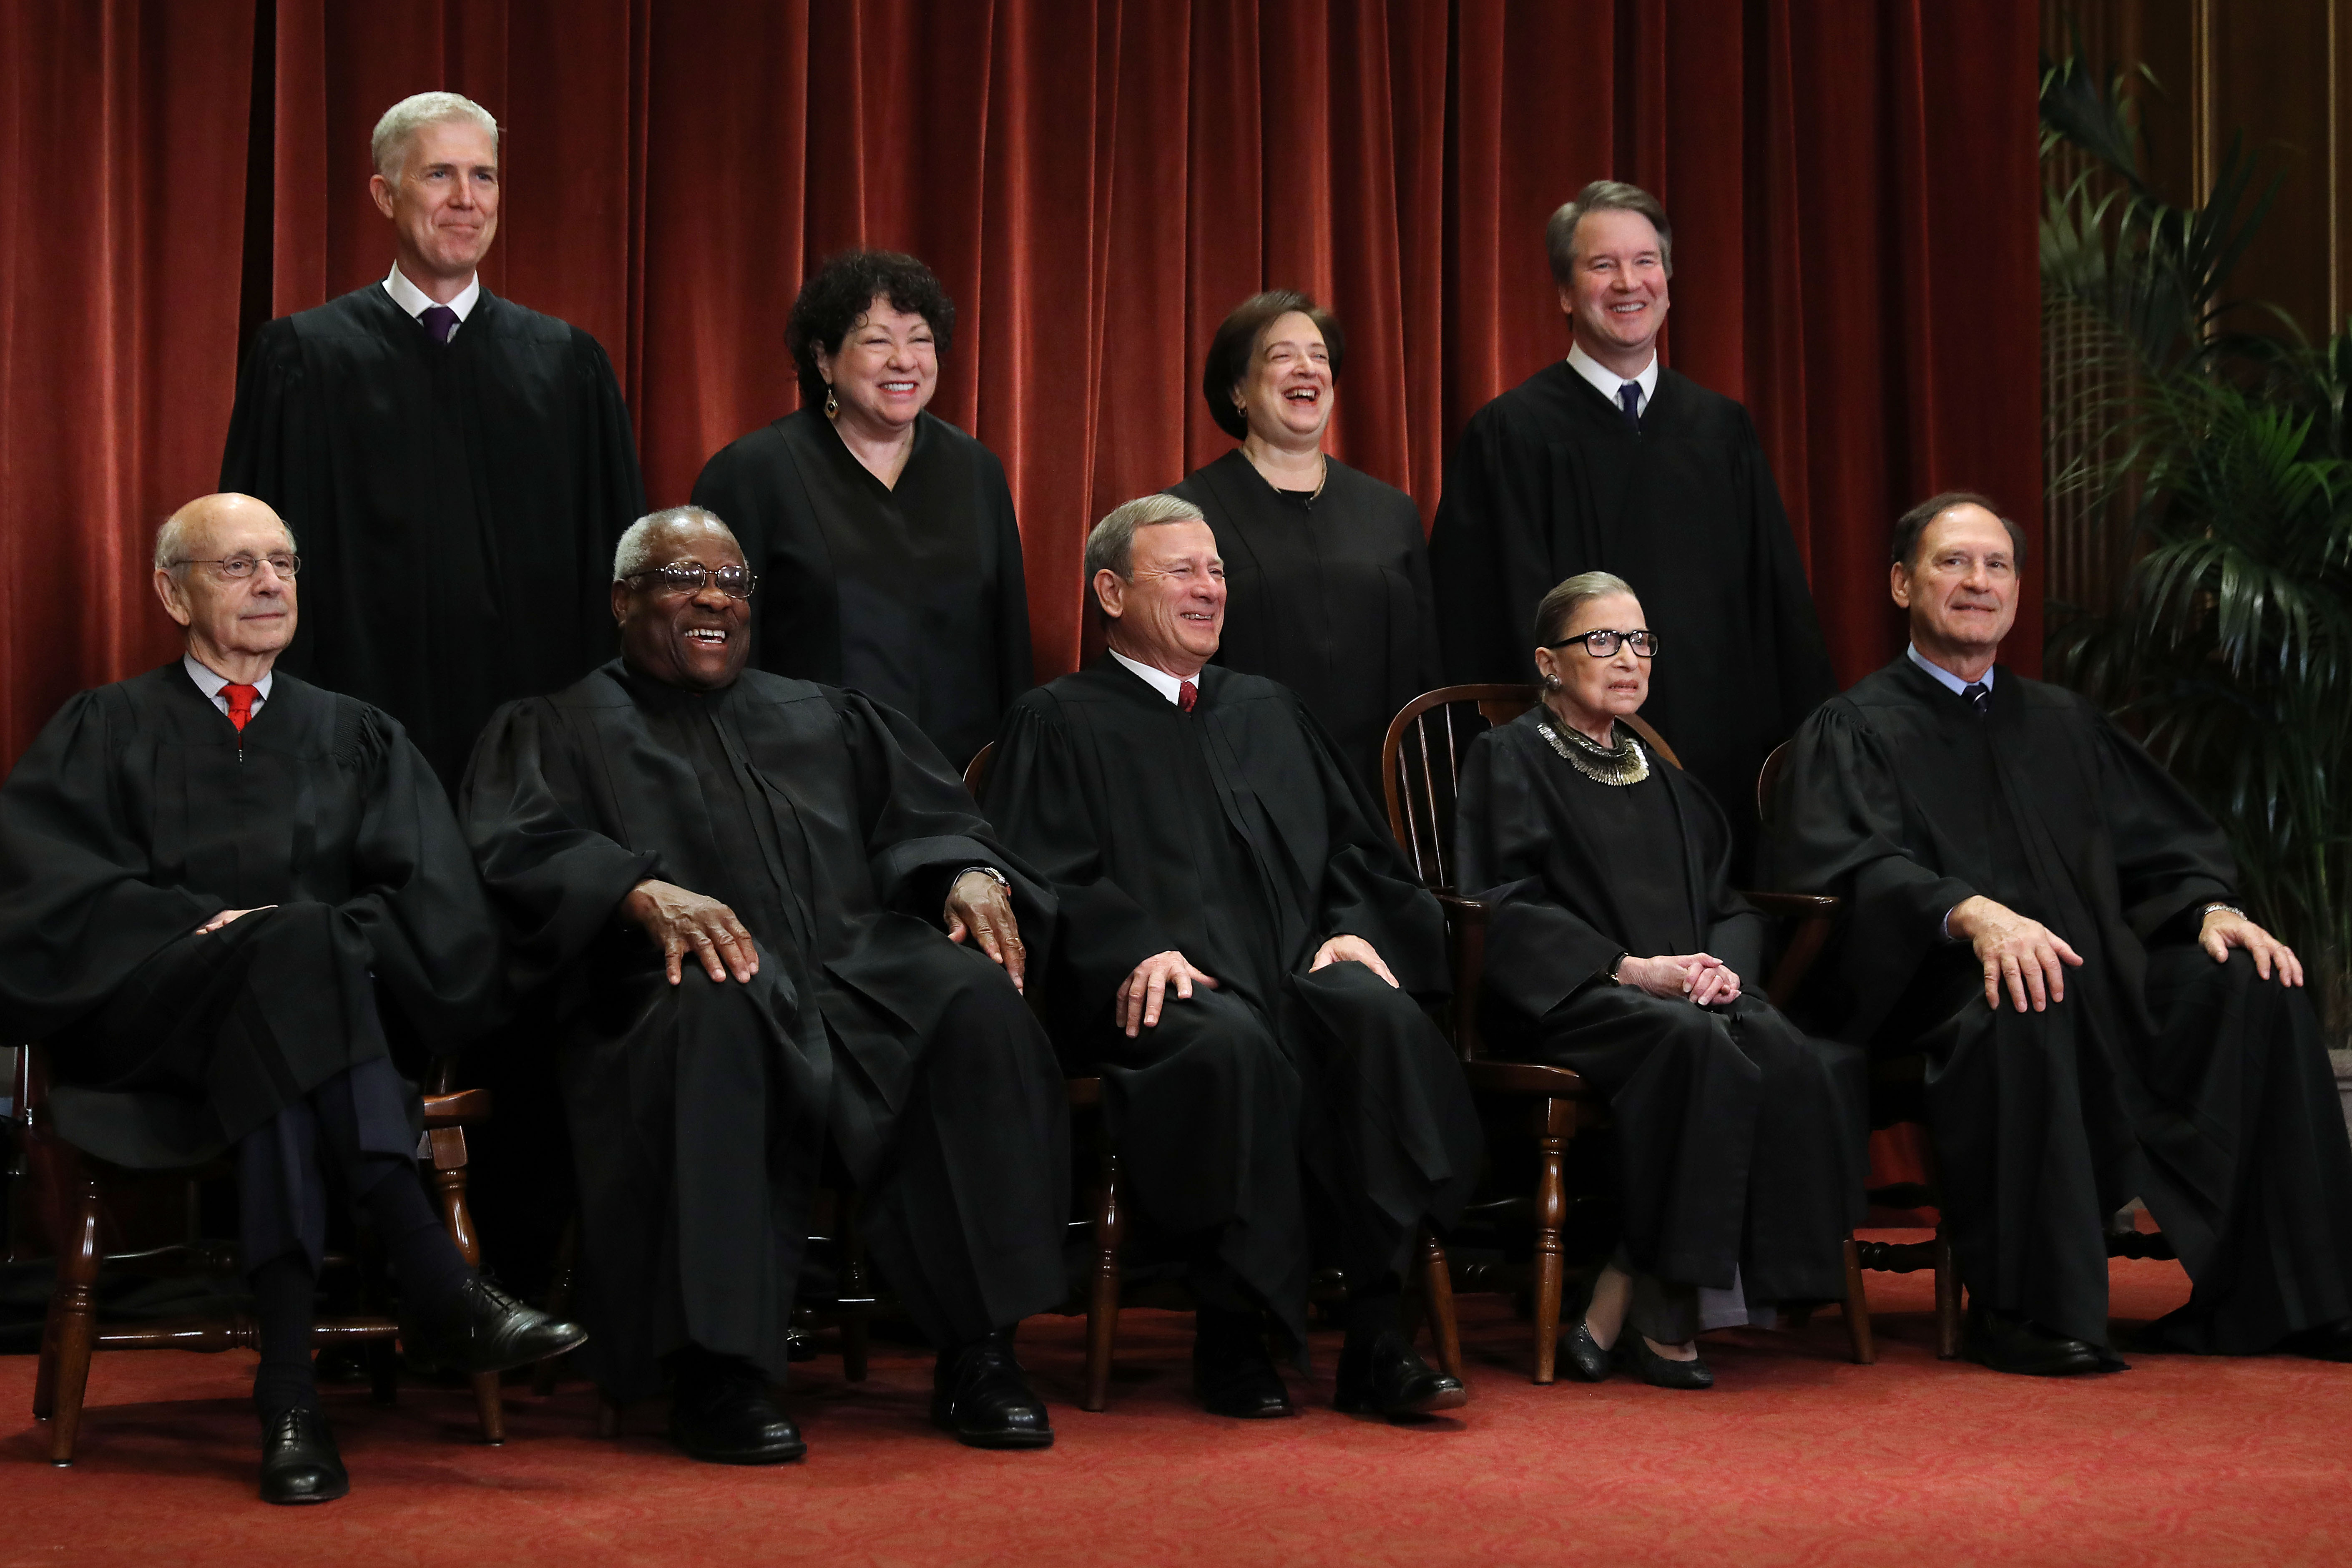 The justices of the Supreme Court on November 30, 2018. (Chip Somodevilla/Getty Images)